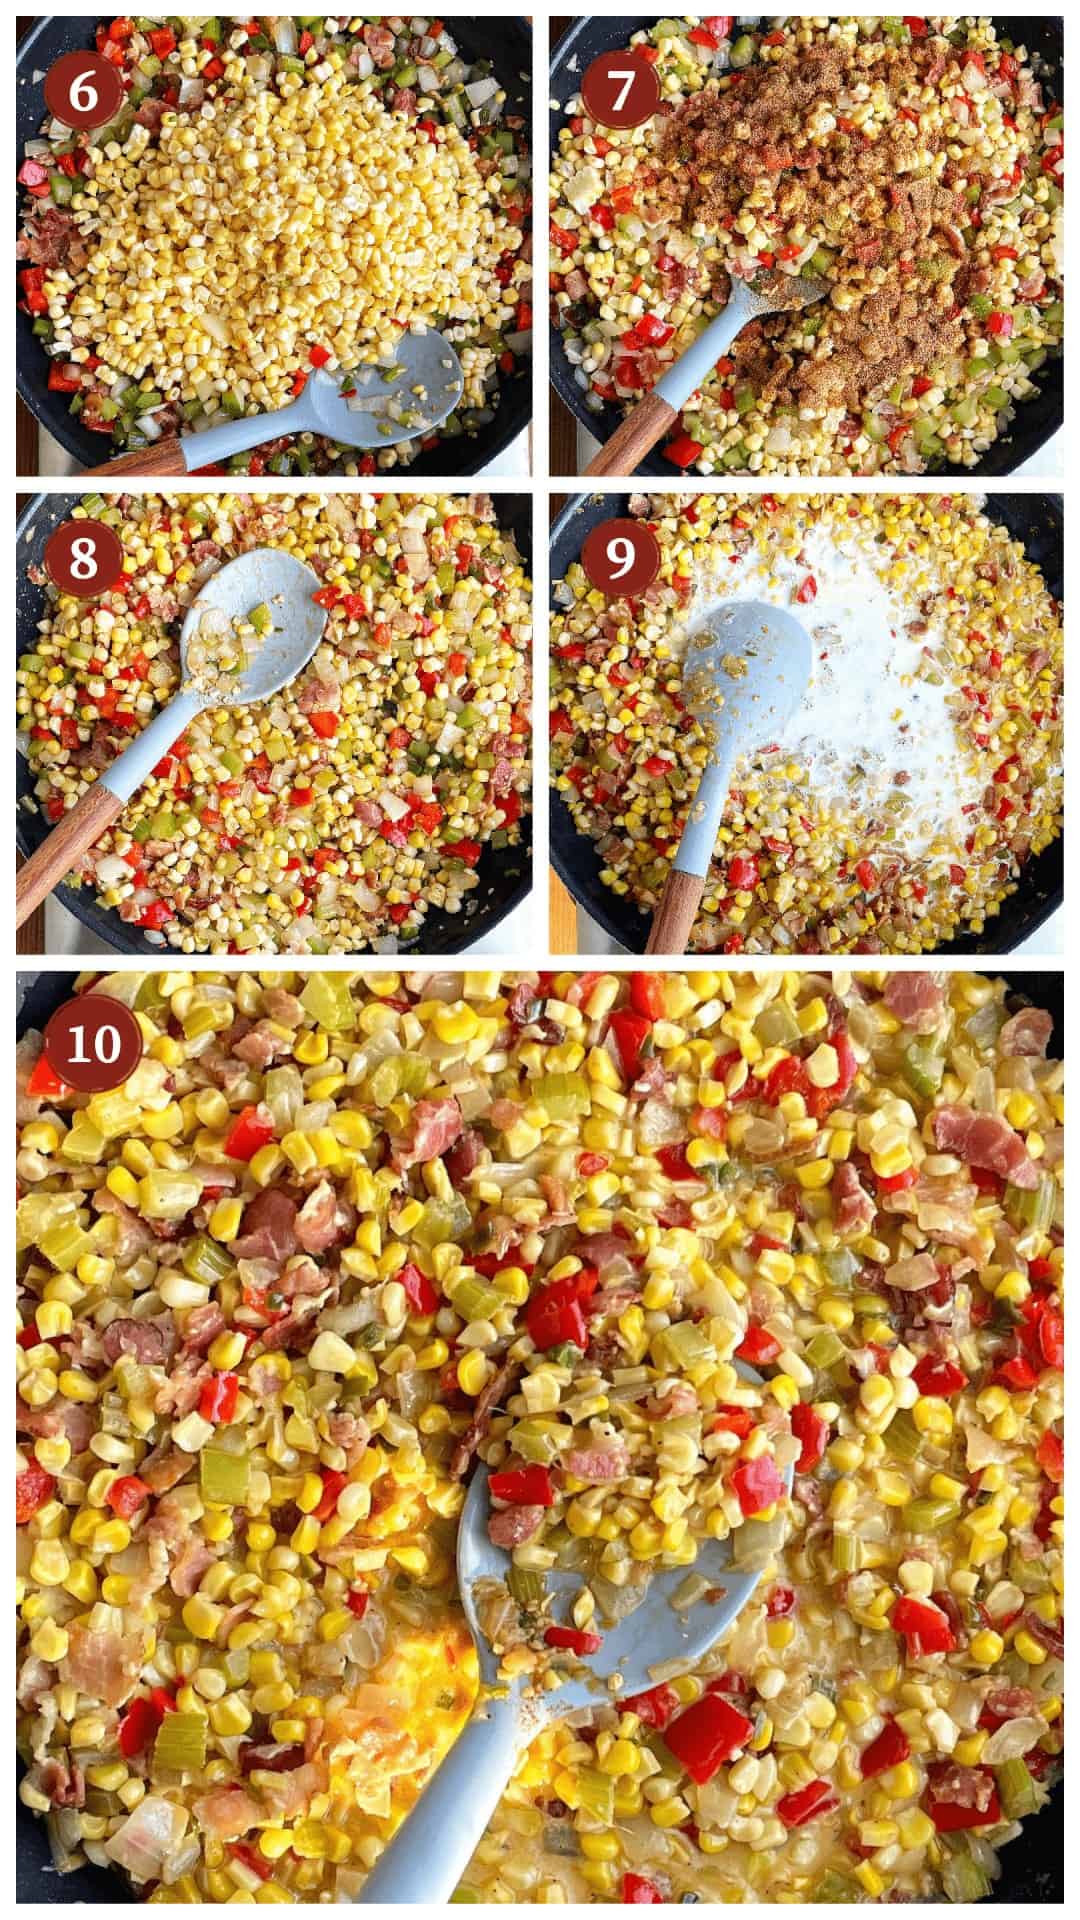 A collage of images showing how to make corn maque choux, steps 6 - 10.